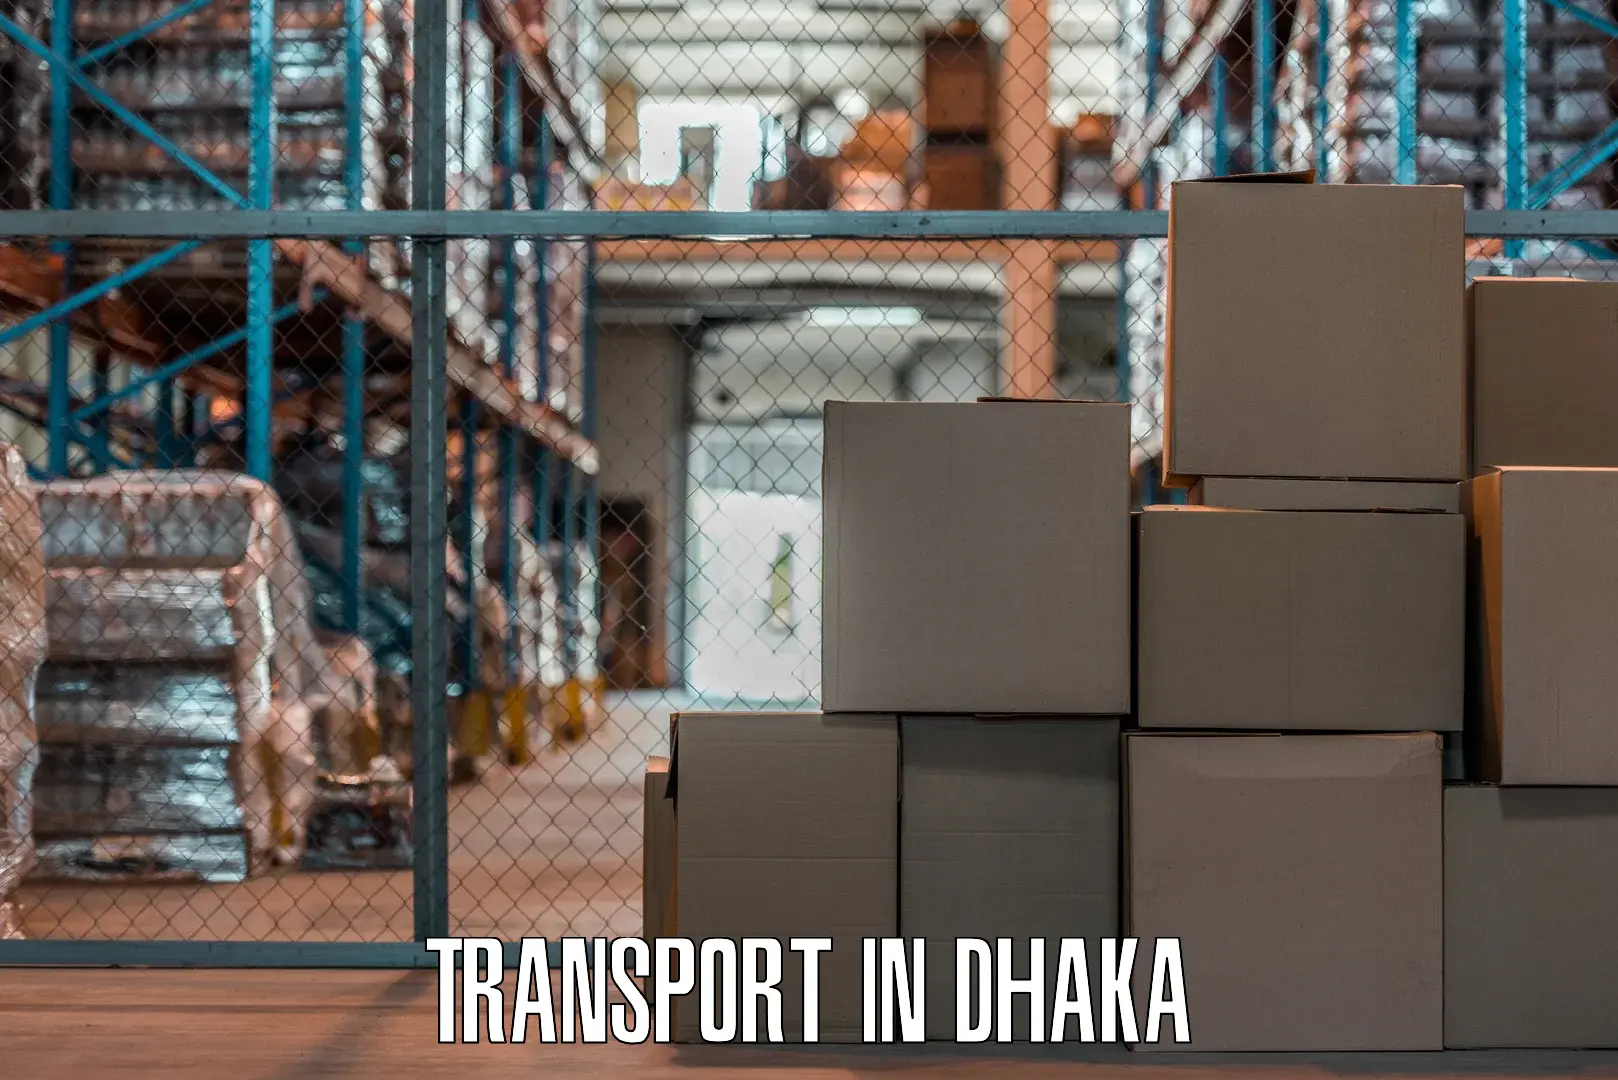 Container transport service in Dhaka